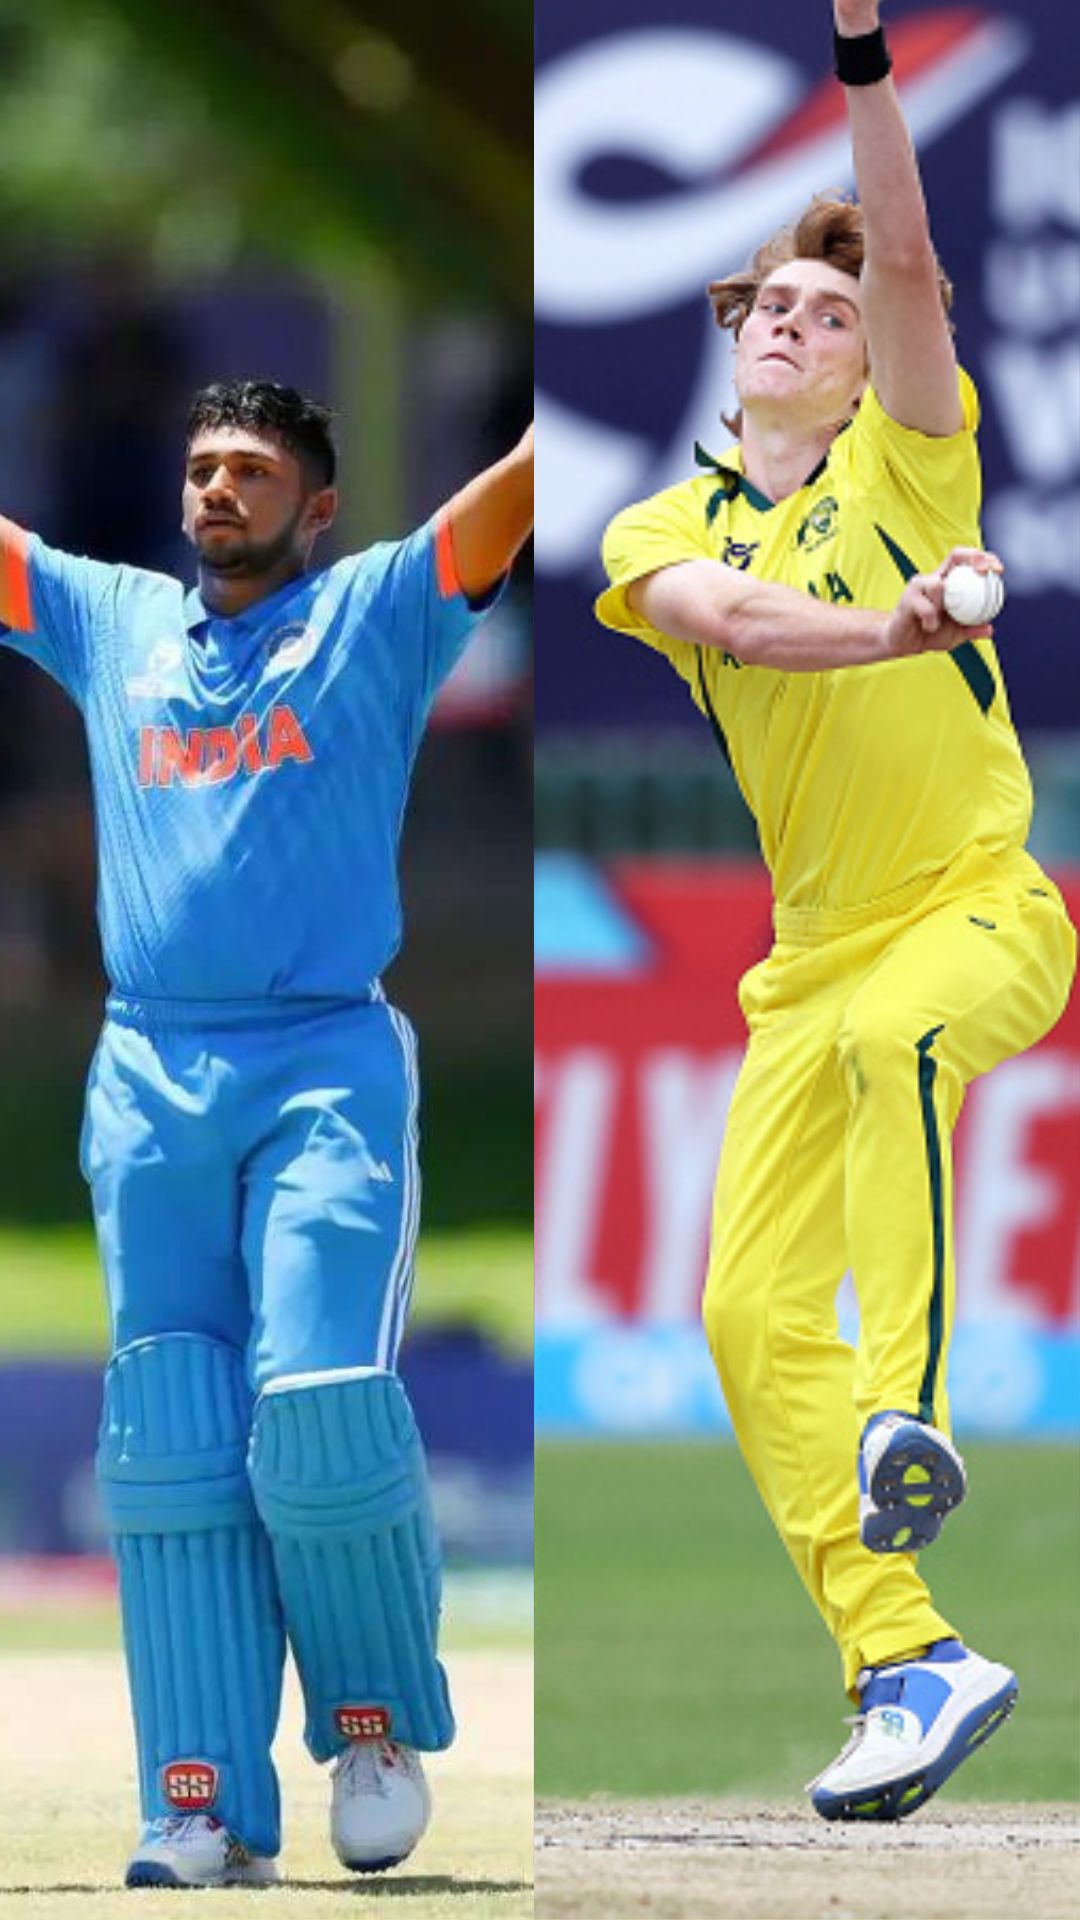 U19 World Cup players who can be picked in IPL